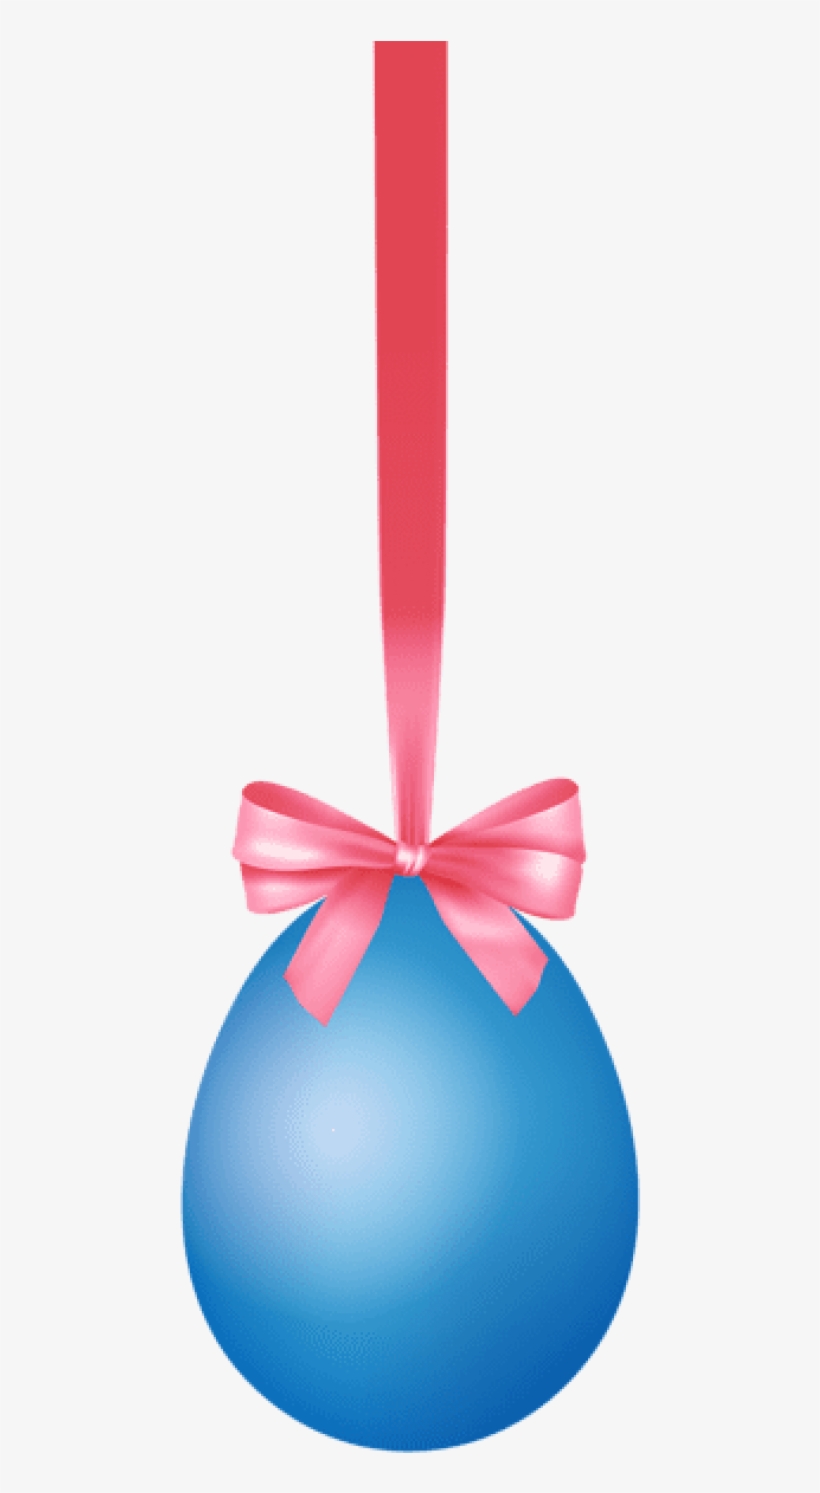 Blue Hanging Easter Egg With Bow Transparent Png - Portable Network Graphics, transparent png #4963608